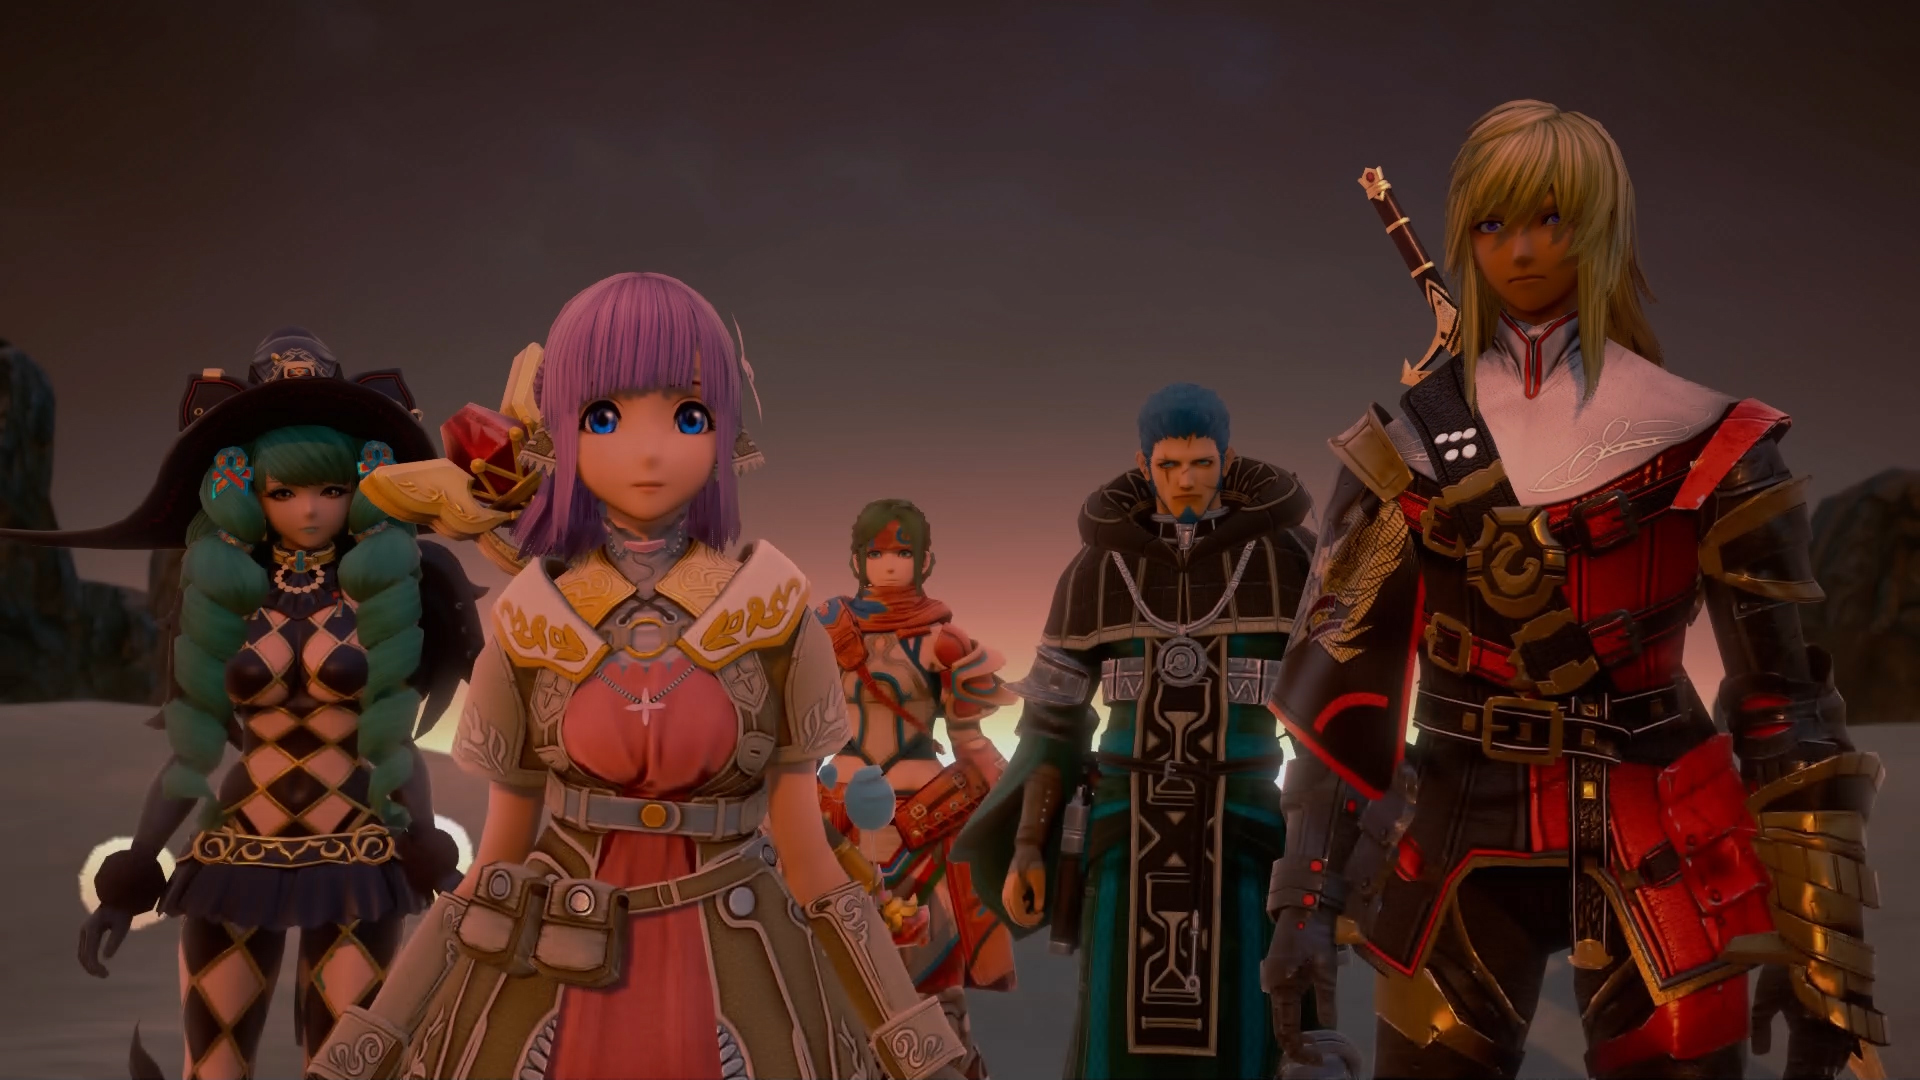 Metacritic - Star Ocean: Integrity and Faithlessness reviews are in, and  the early critics are VERY lukewarm about it [Metascore = 56]  metacritic.com/game/playstation-4/star-ocean-integrity-and-faithlessness